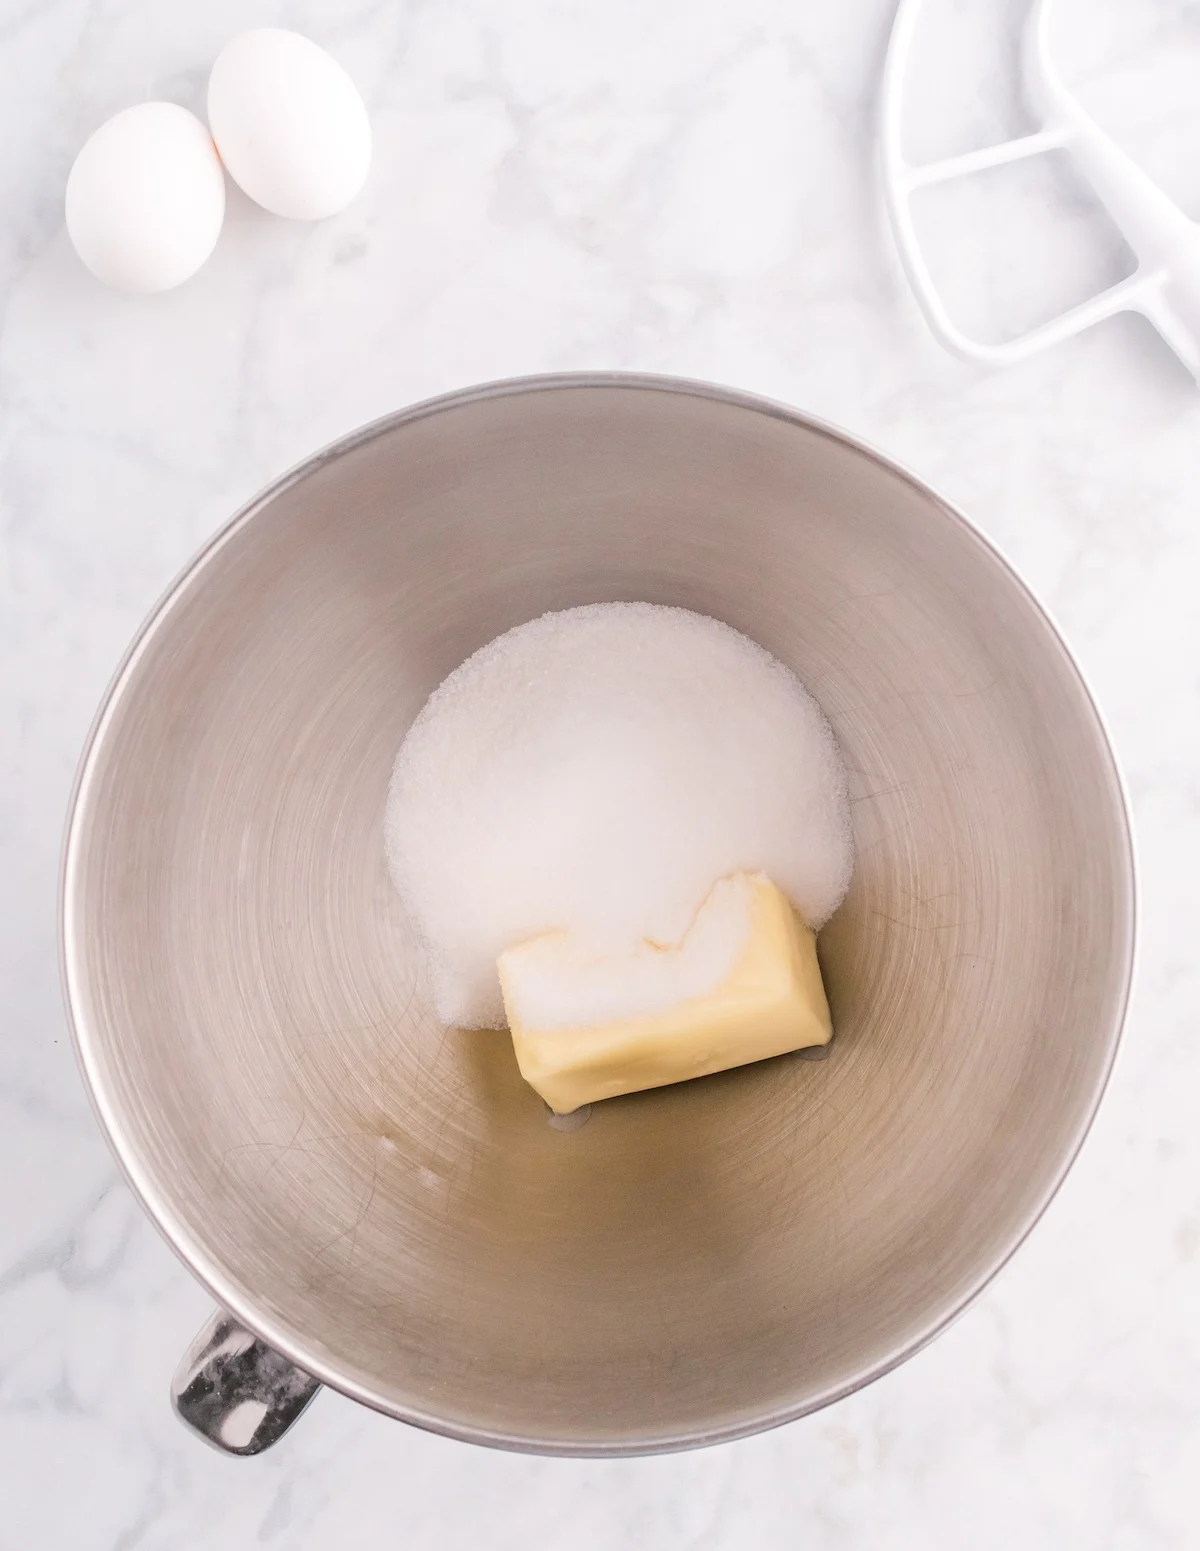 Butter and sugar together in a metal bowl